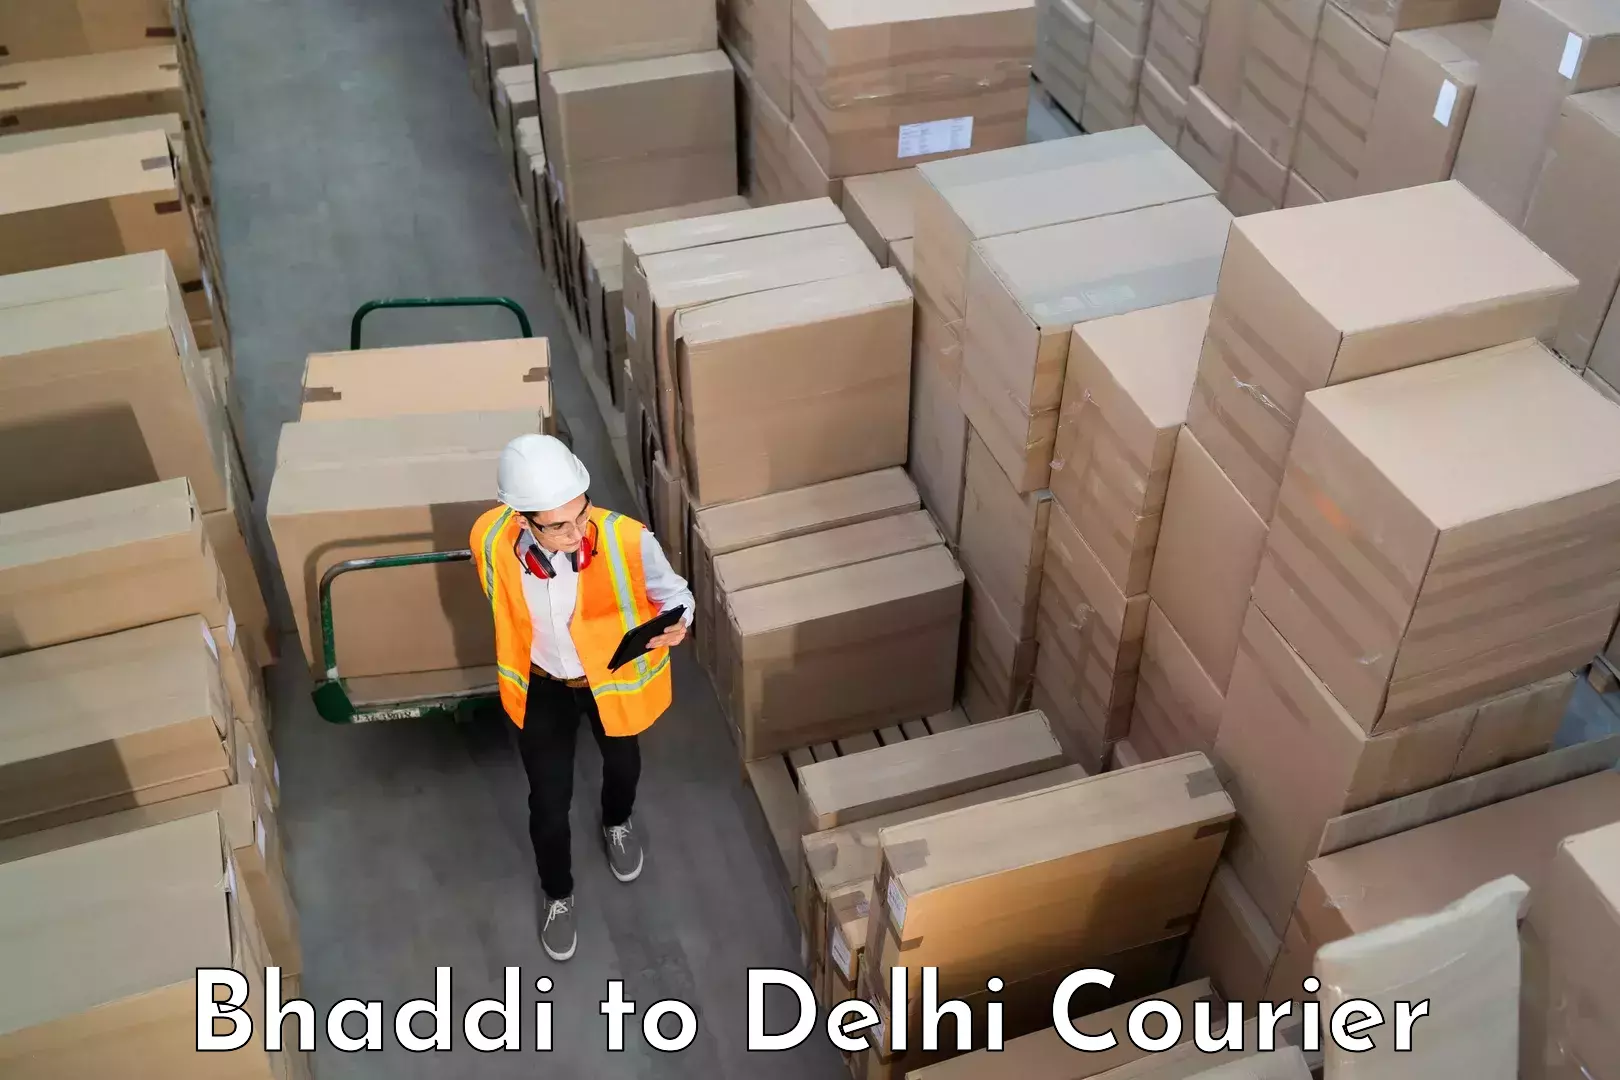 Hassle-free luggage shipping Bhaddi to NCR